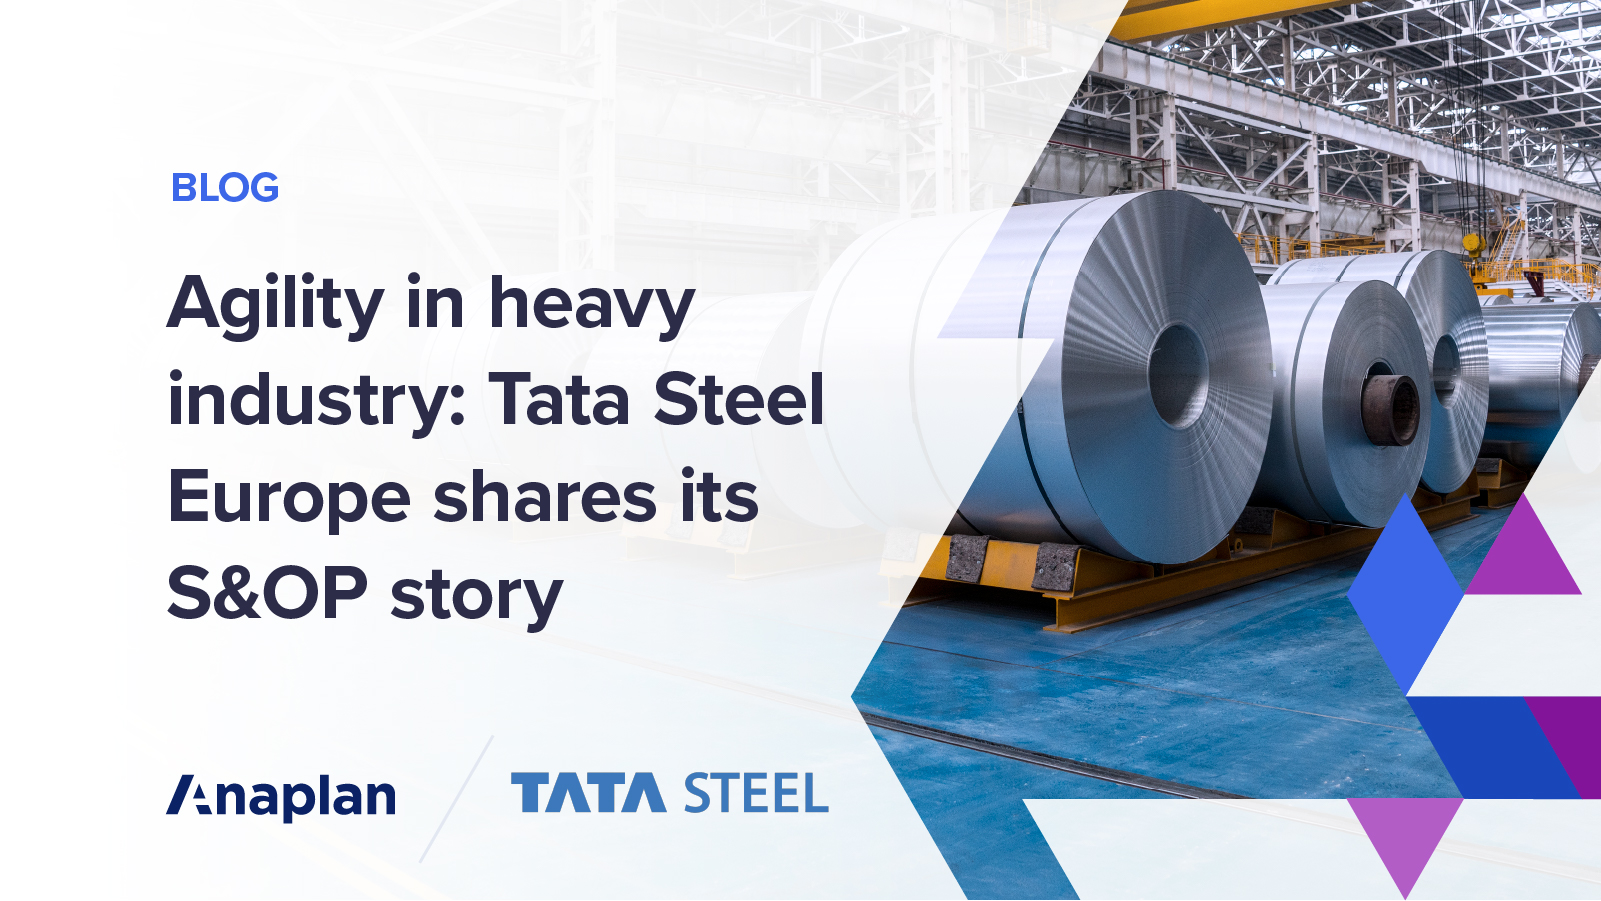 How Digital Transformation Is Aiding Tata Steel's Growth In India - Forbes  India